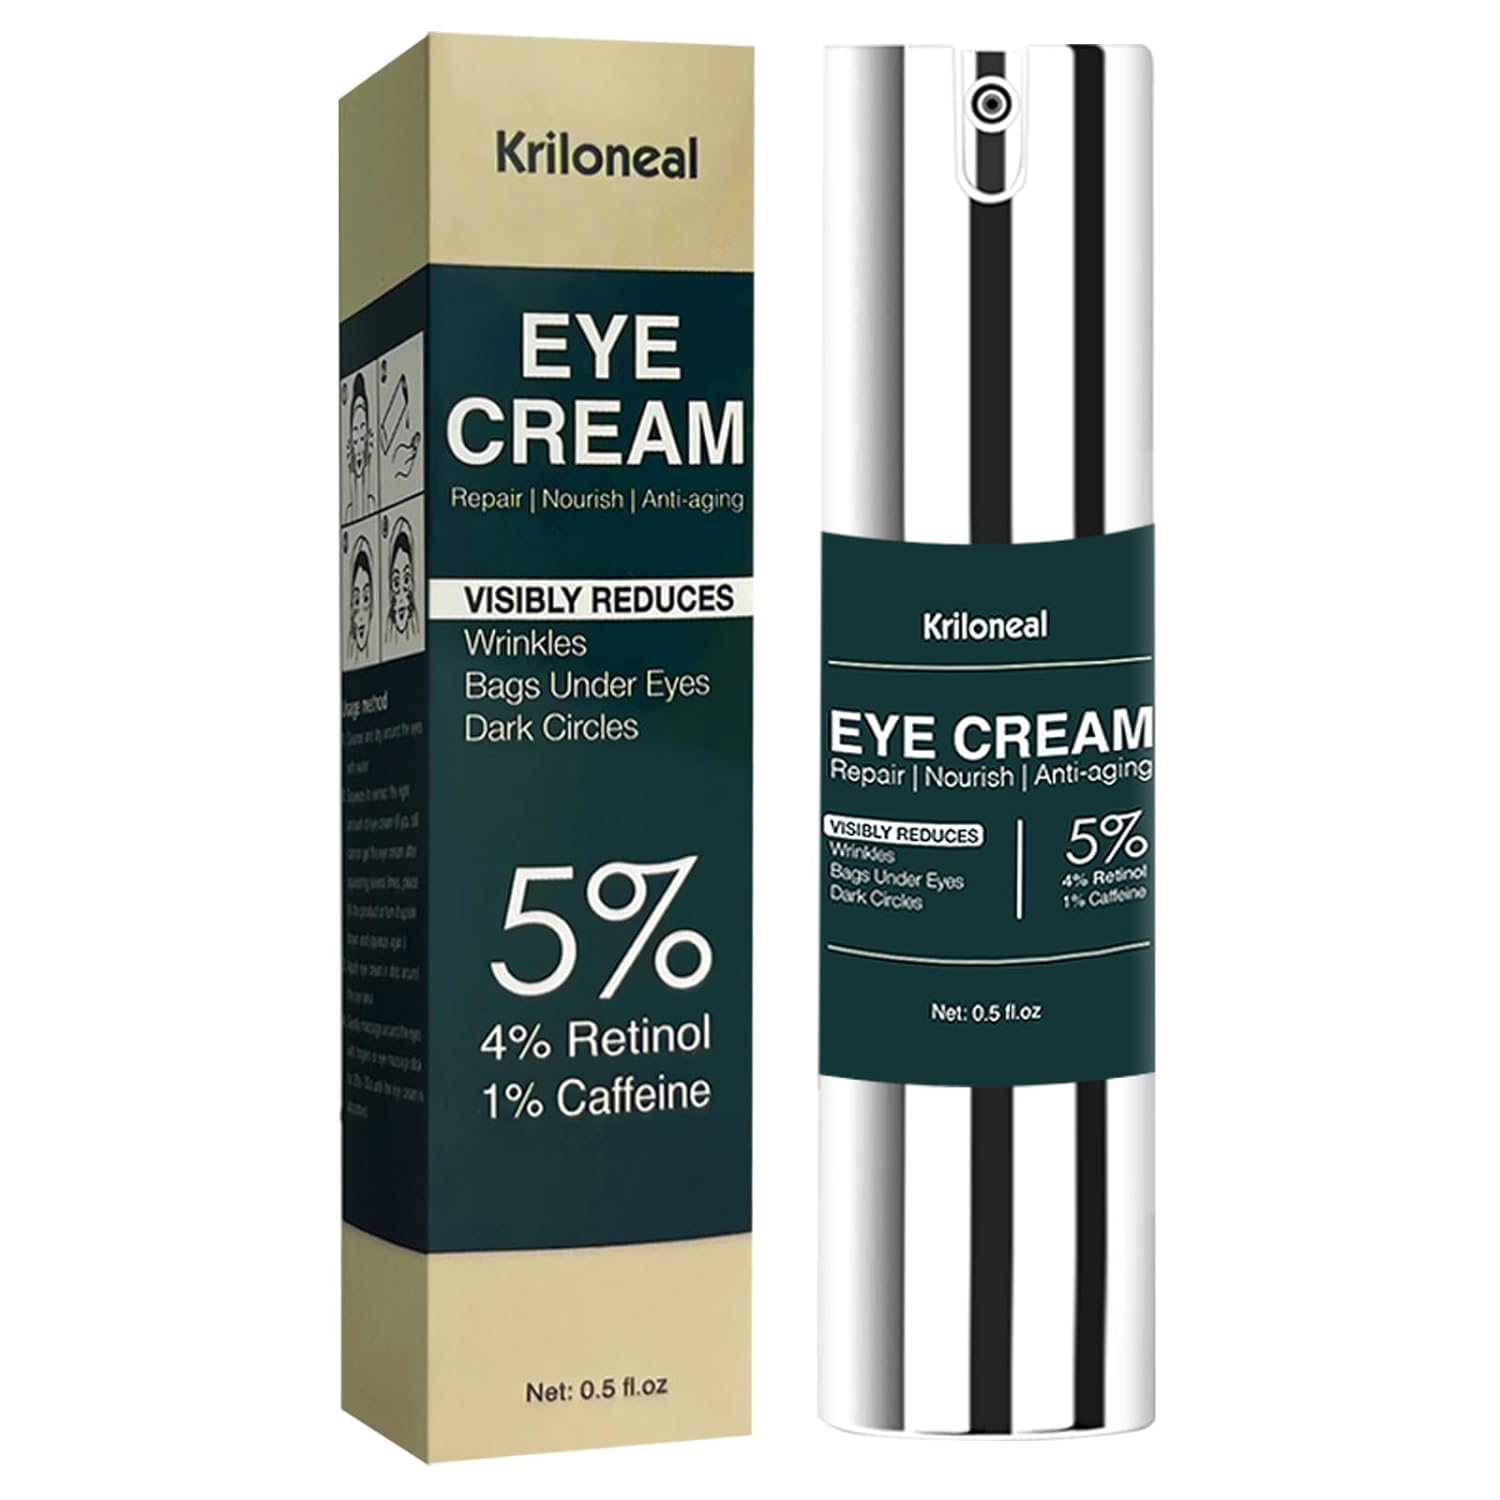 Kriloneal Retinol & Caffeine Eye Cream for Dark Circles and Puffiness and Wrinkles, Nourish Repair Anti-aging Eye Area with Hyaluronic Acid Hydrolyzed Collagen Squalene Beeswax